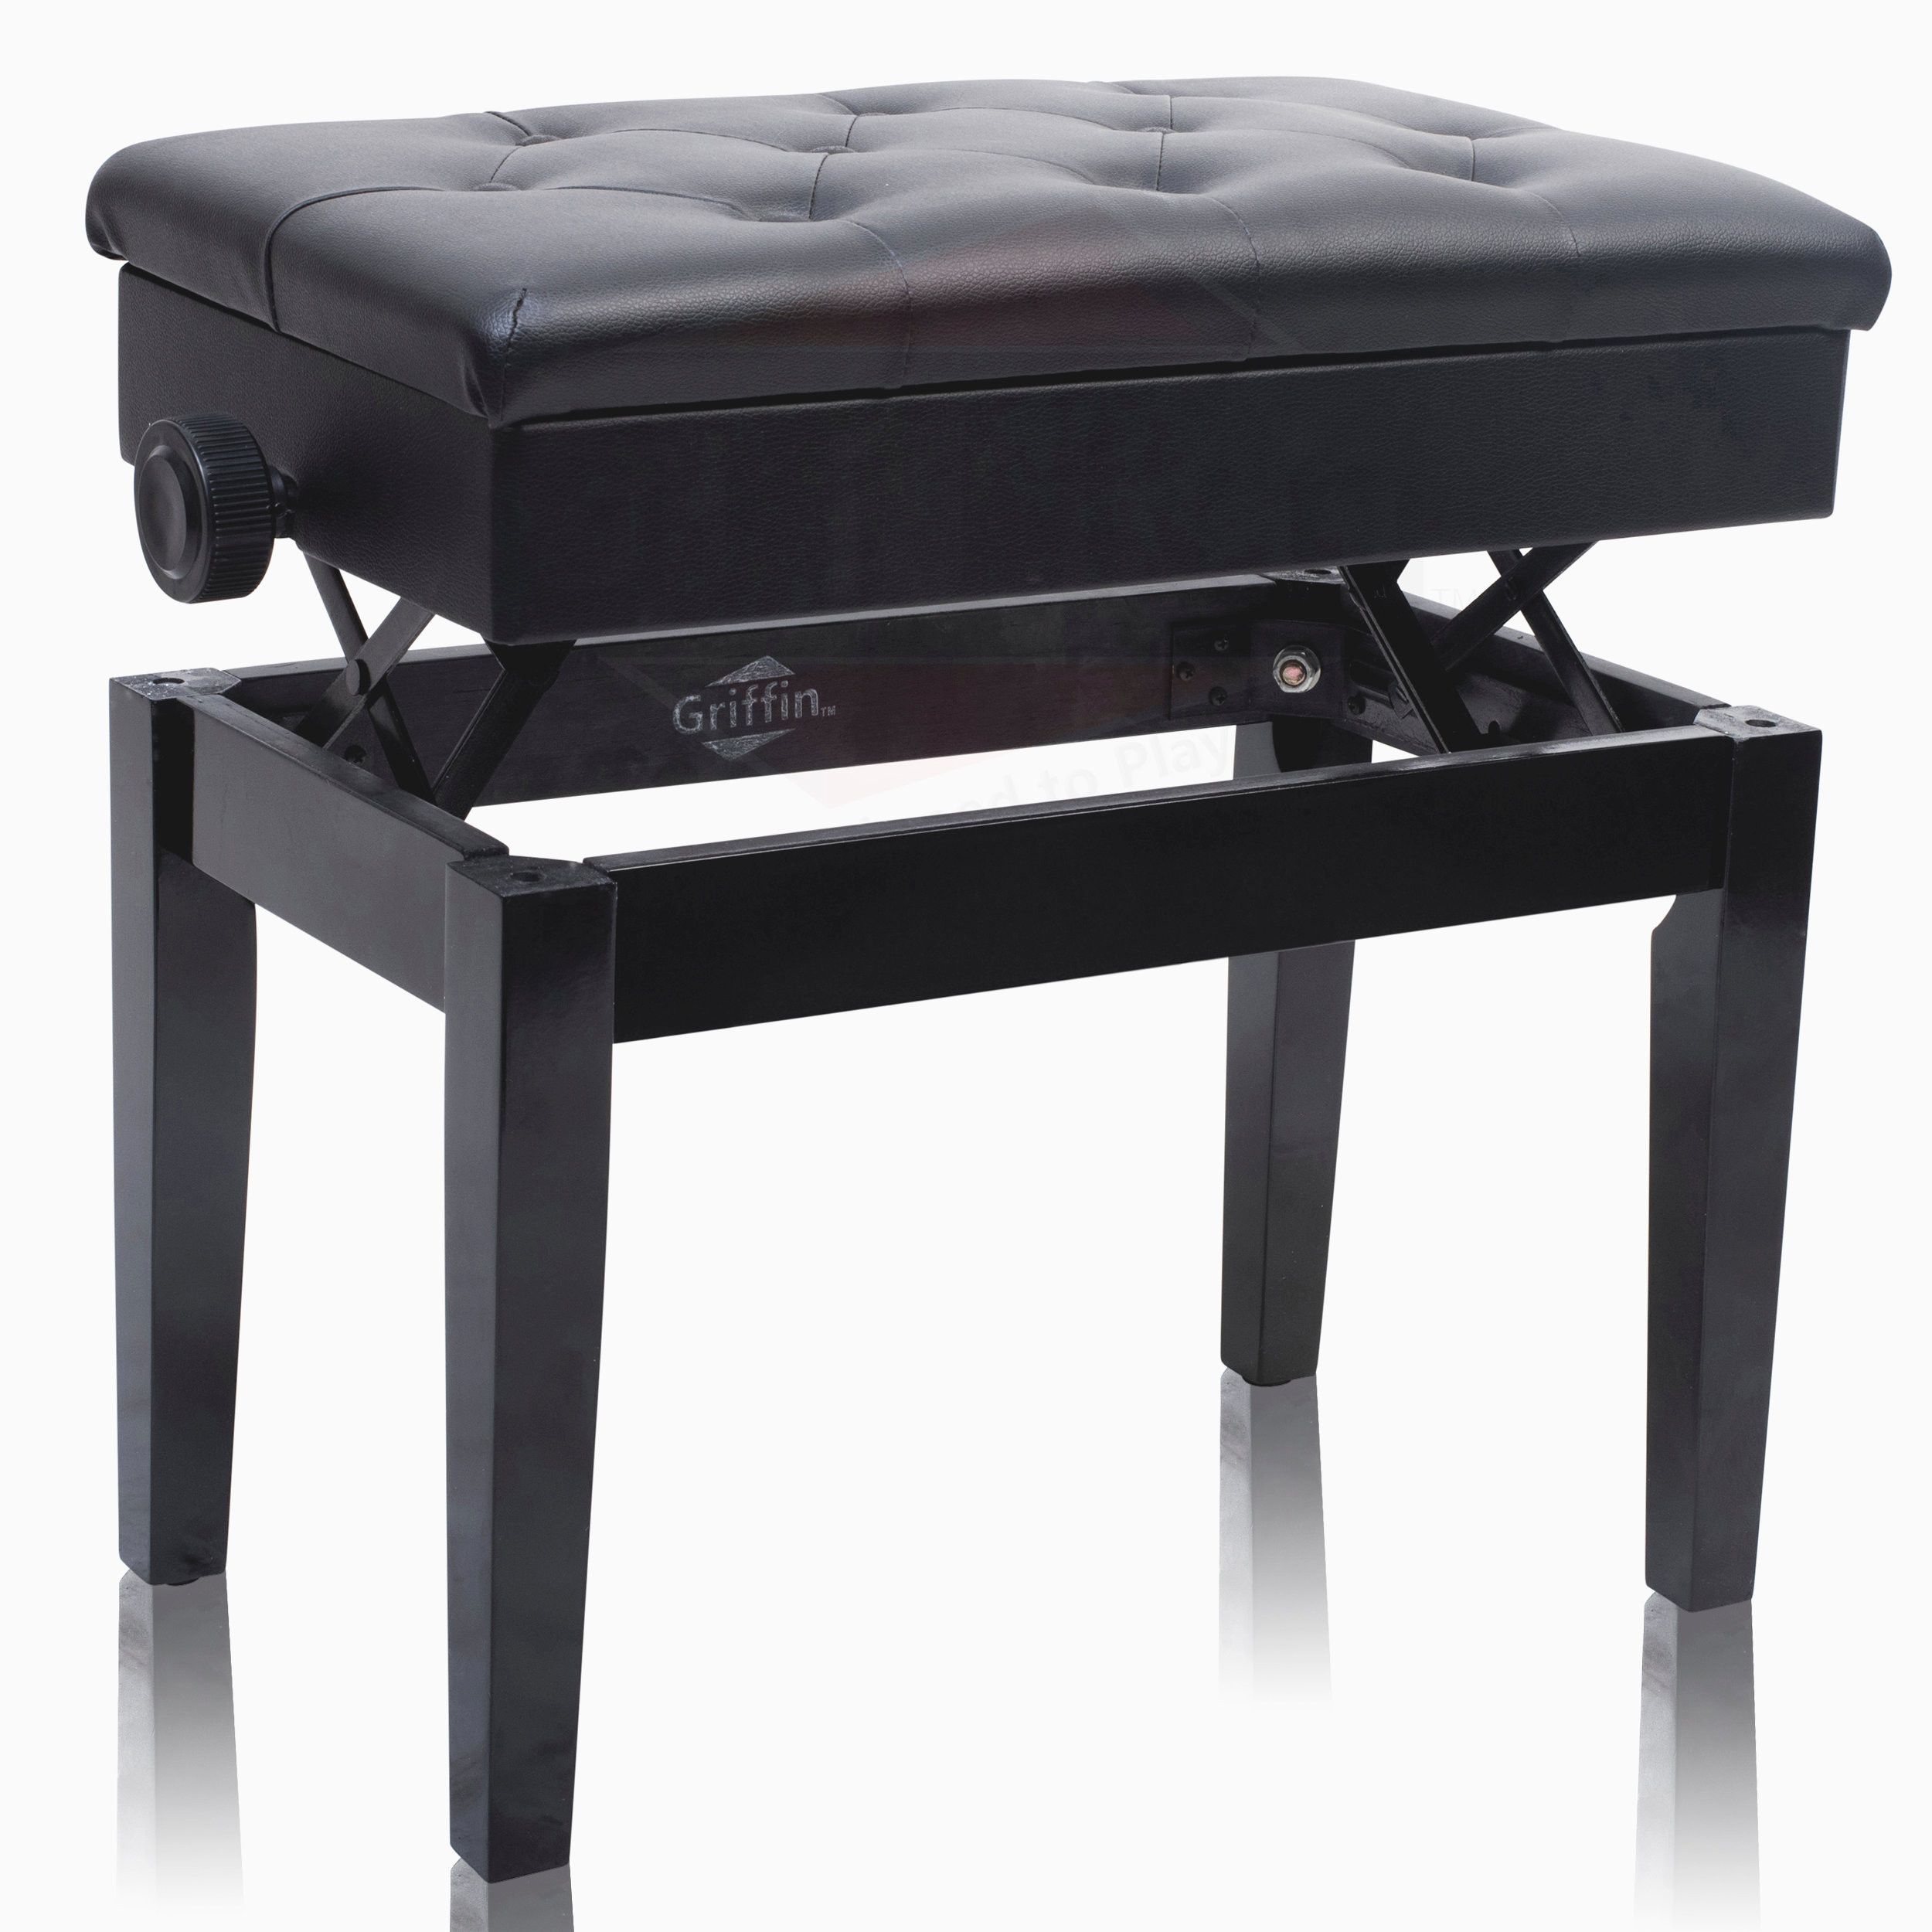 Keyboard Bench With Storage
 Black Leather Piano Bench Griffin Storage Adjustable